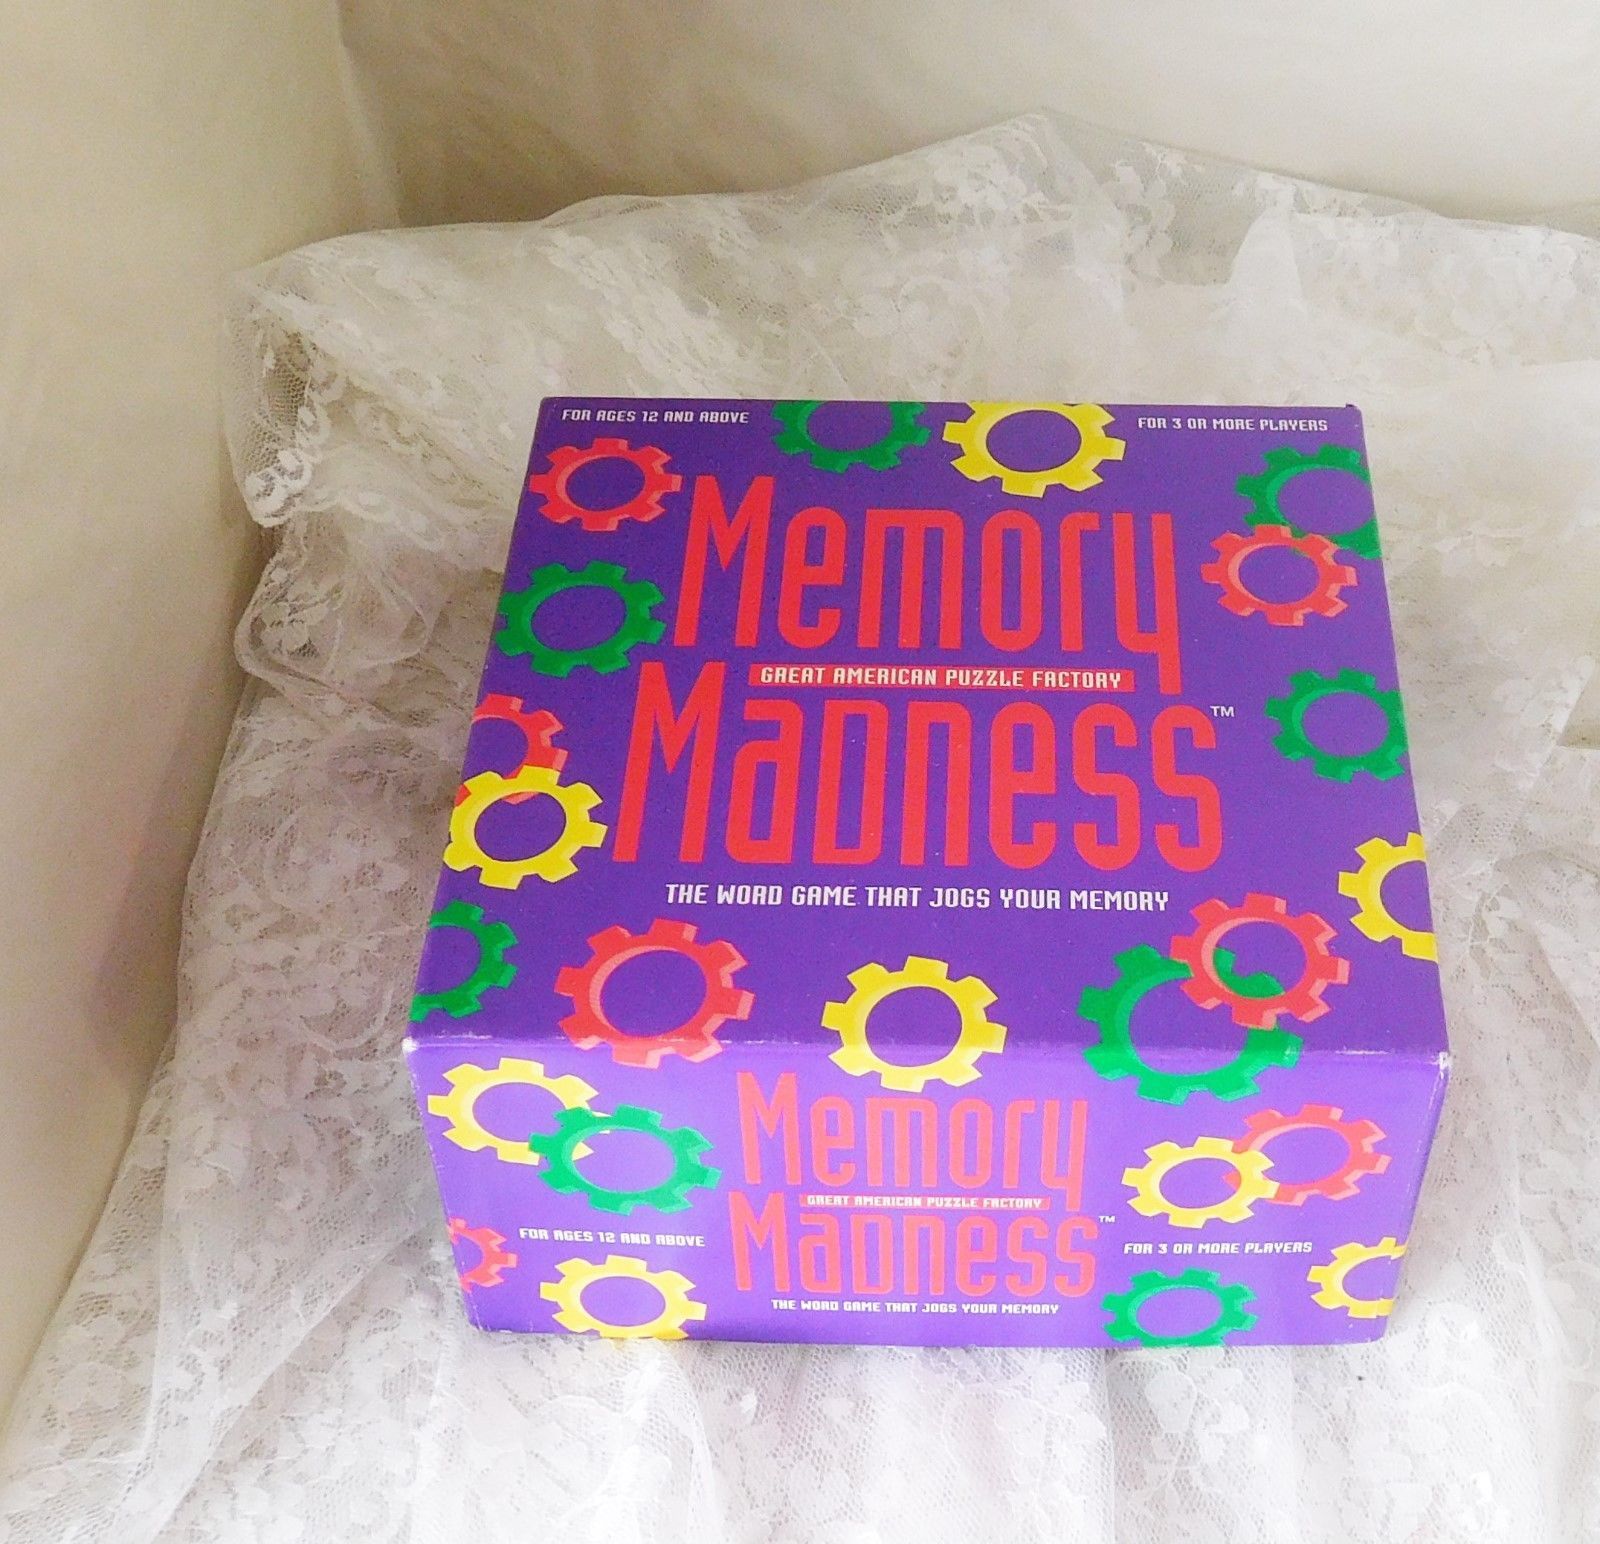 1994 Great American Puzzle Factory - Memory Maddness Board Game #778 - EUC - $14.01